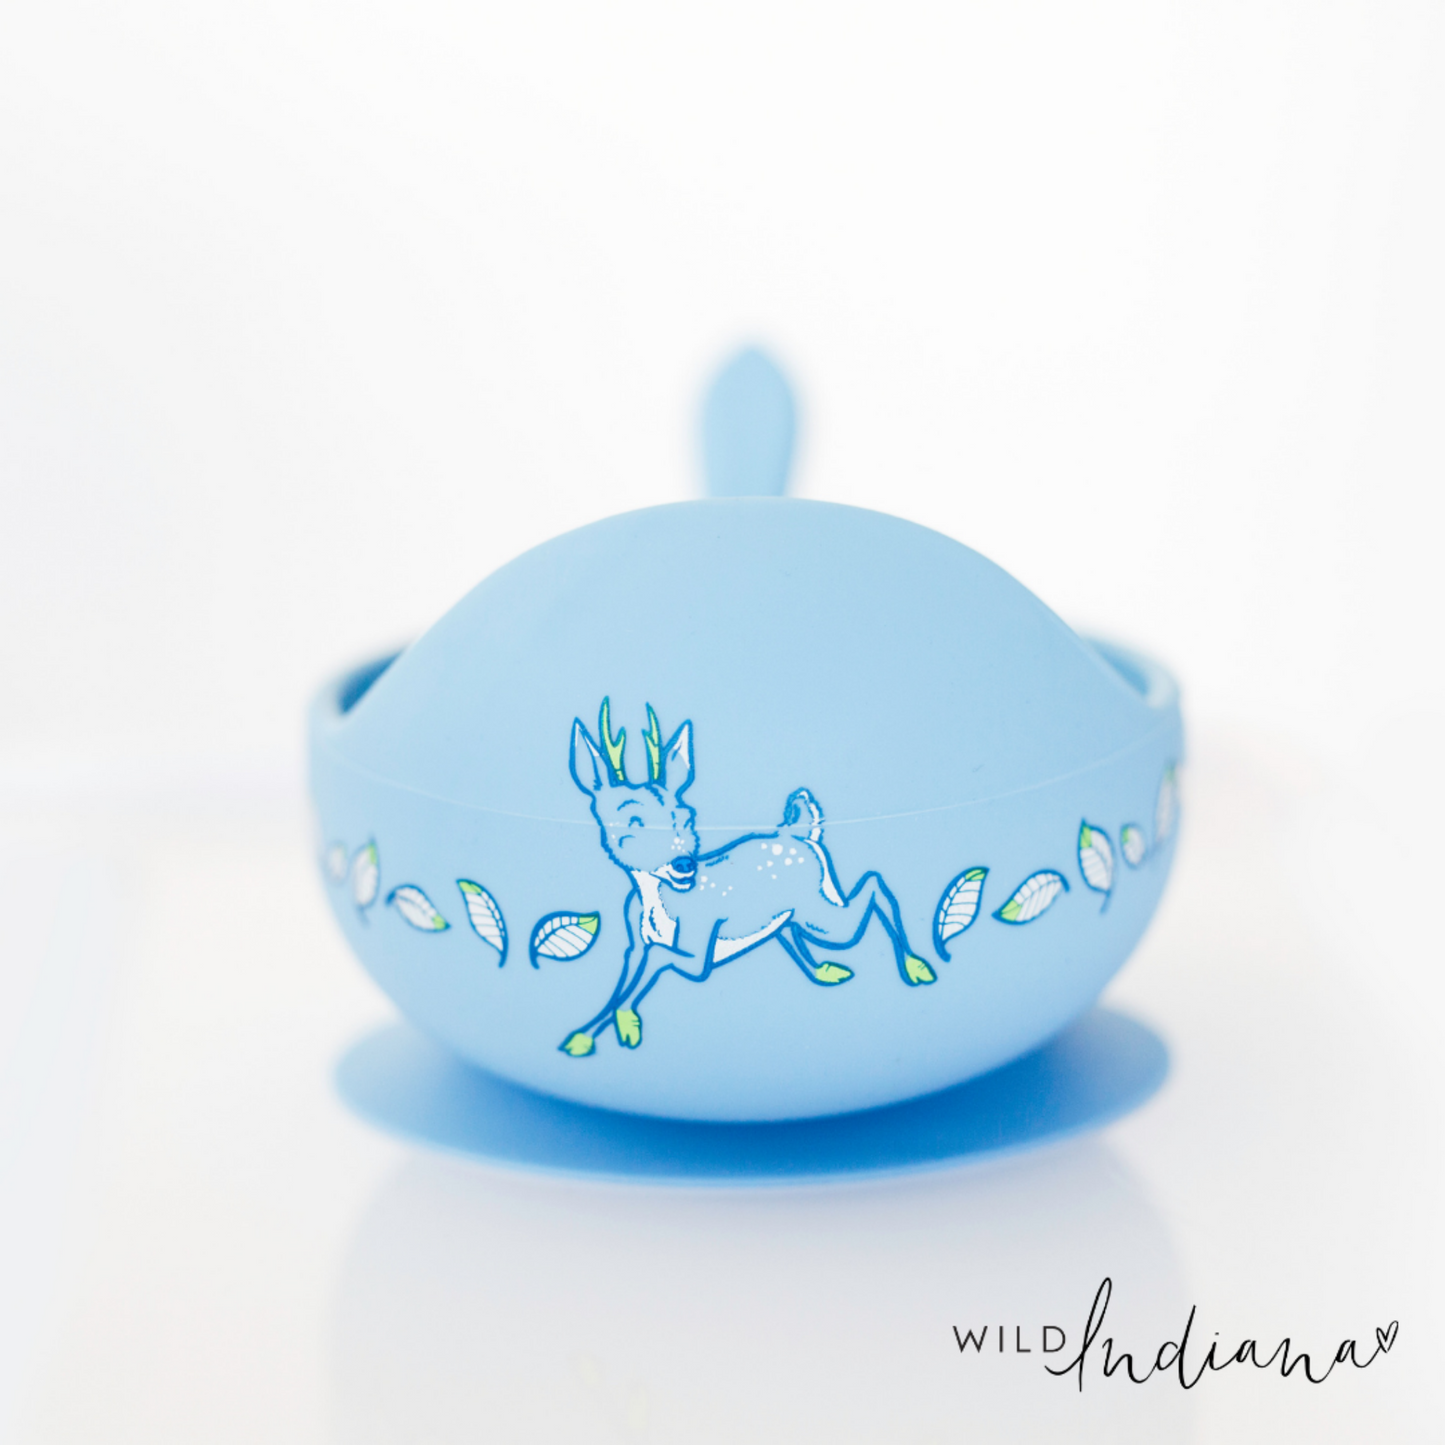 WILD INDIANA - LIMITED EDITION Silicone Bowl Set | DEER